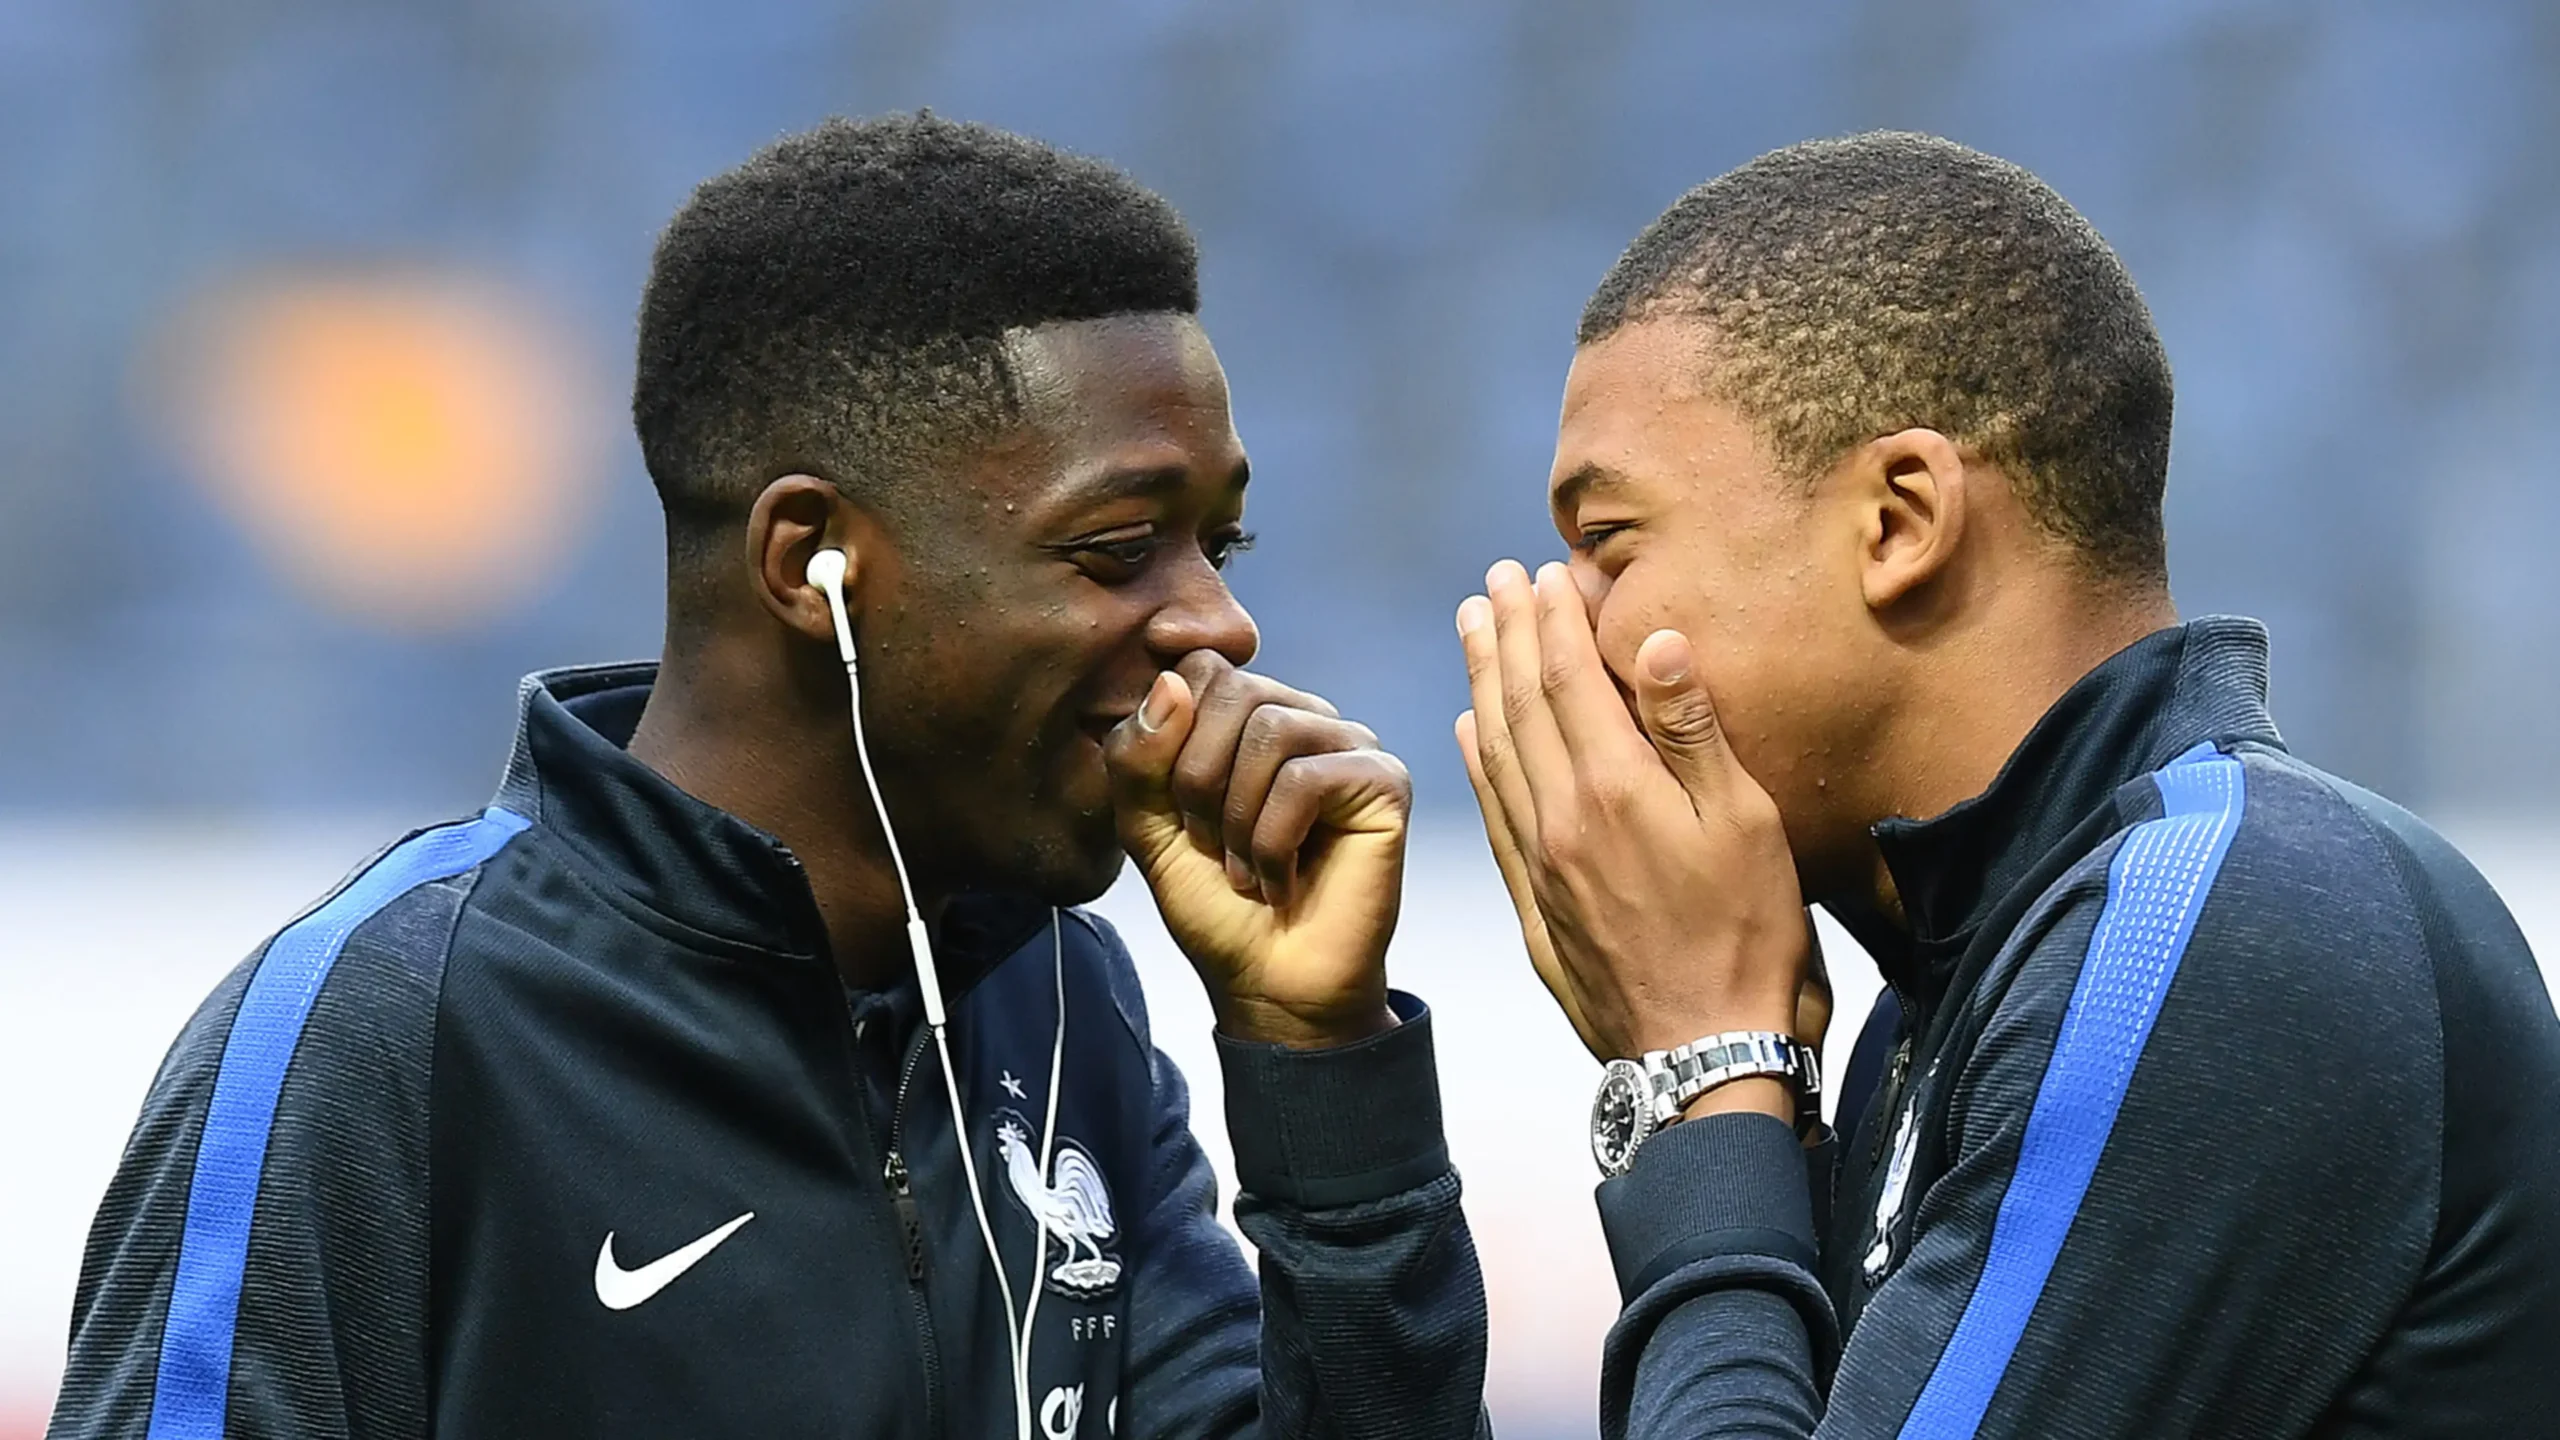 Kylian Mbappe and Ousmane Dembele: PSG's Dynamic Duo Dominate Barcelona